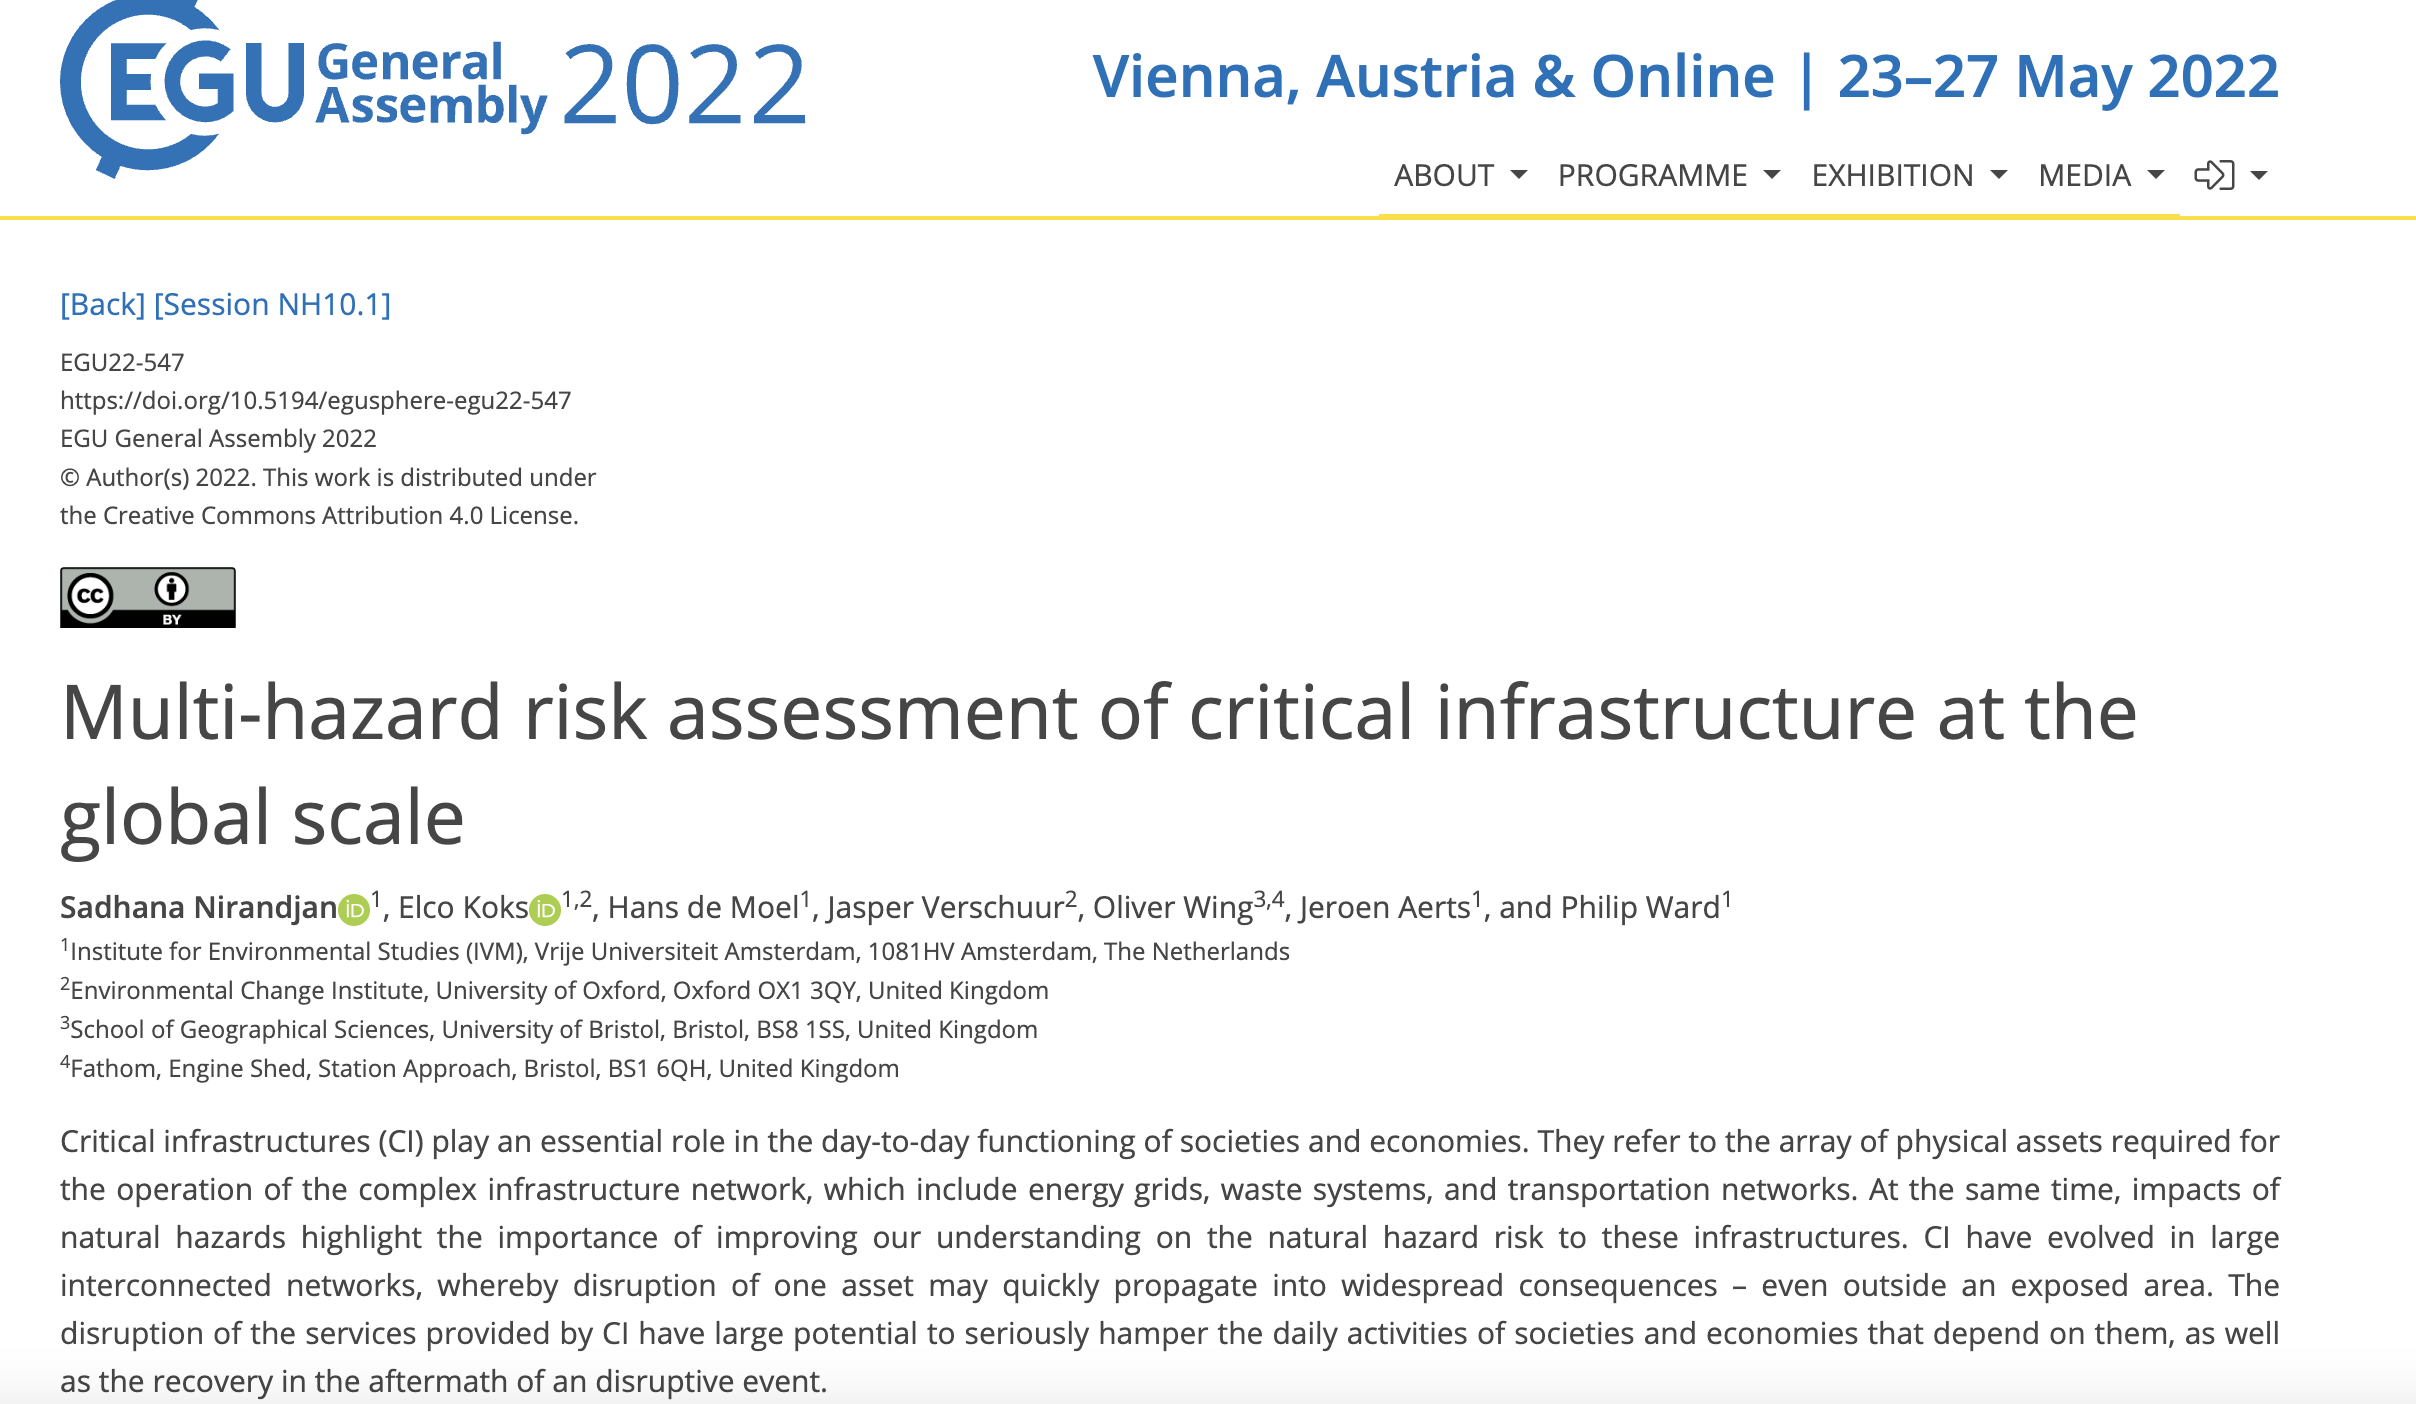 WP7 Sea level rise, infrastructure and coastal flooding- Multi-hazard risk assessment of critical infrastructure at the global scale